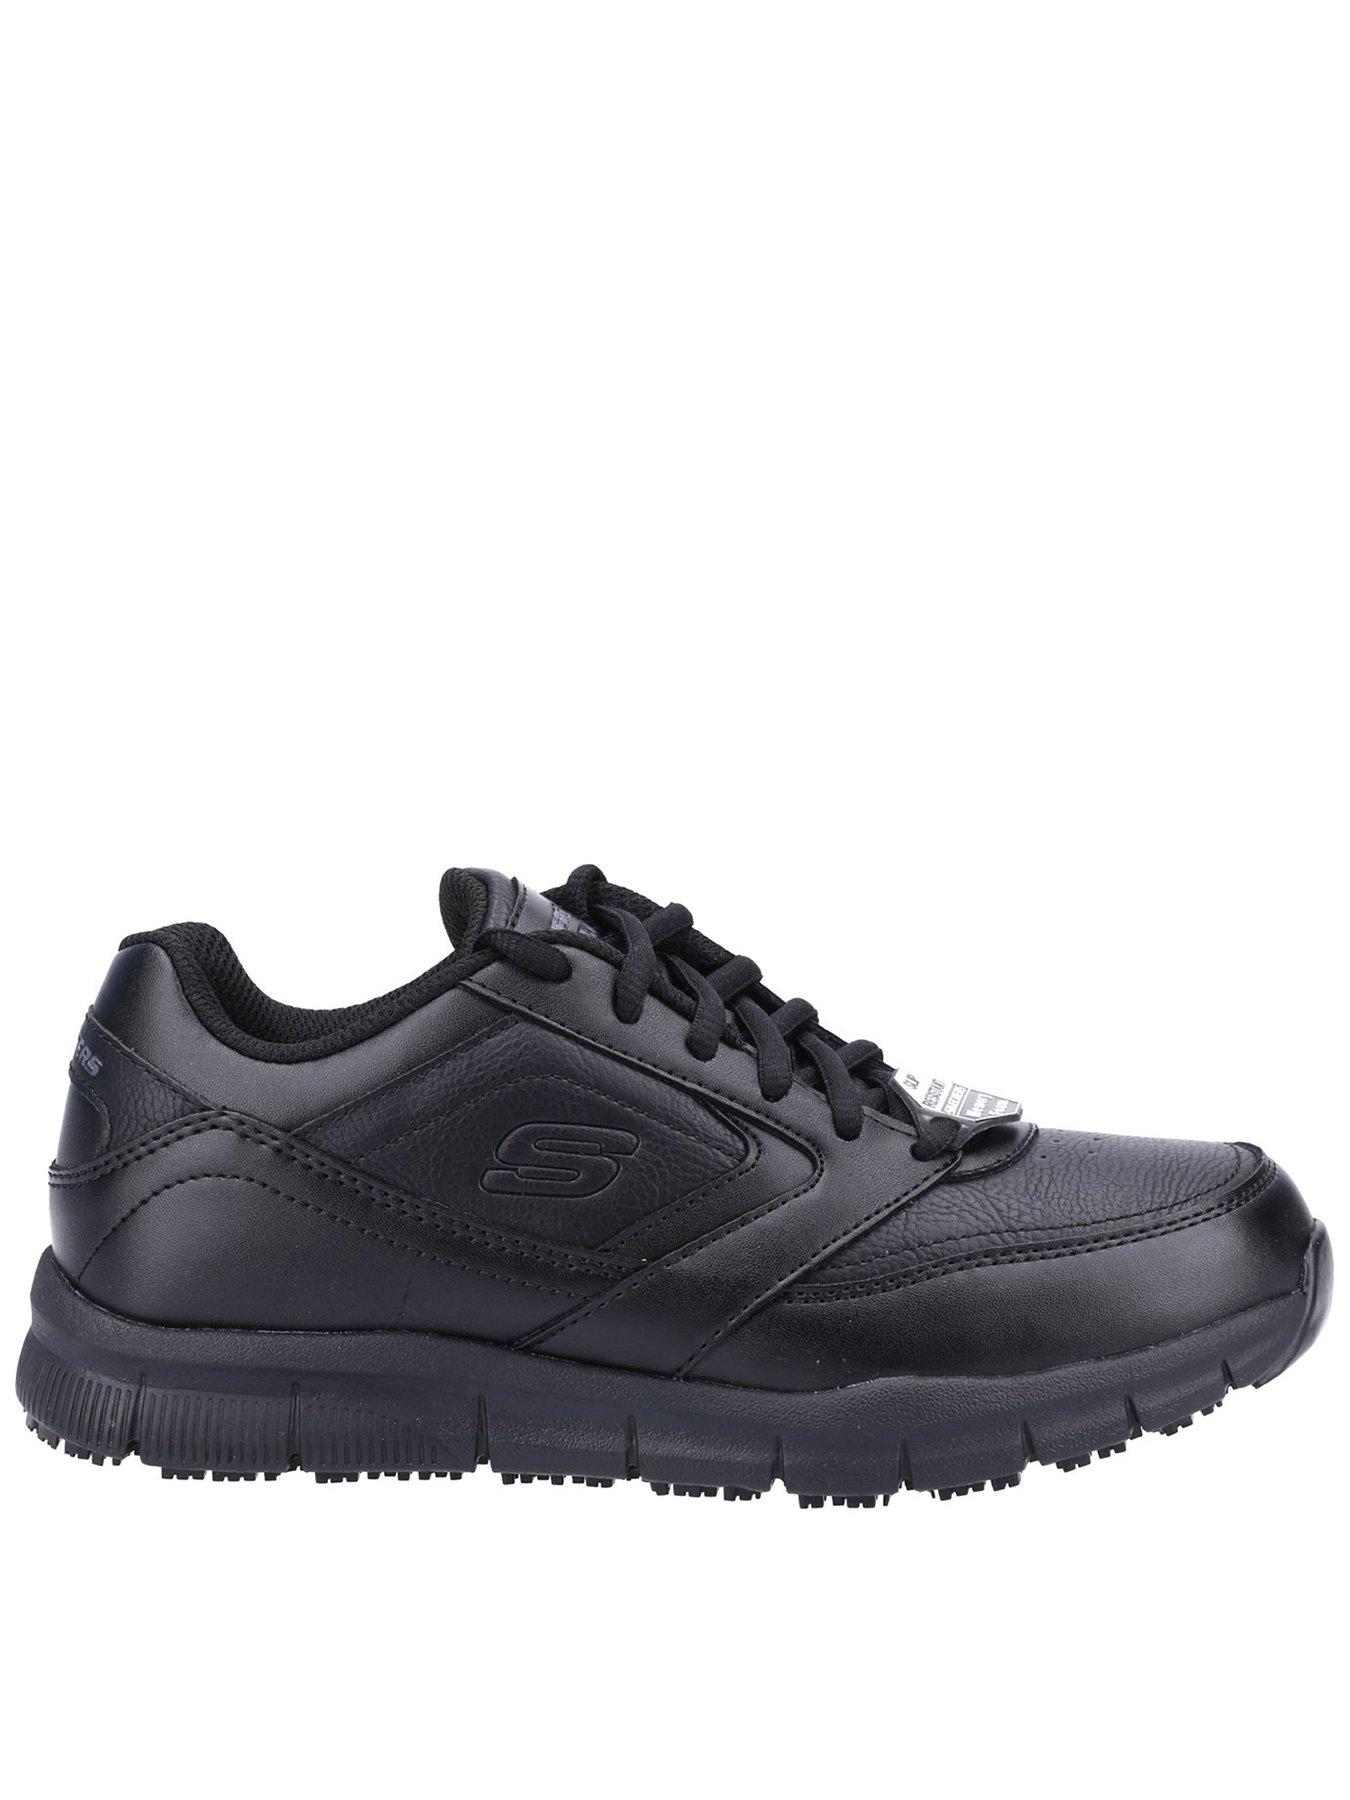 Renacimiento kiwi crítico Skechers Lace Up Athletic Slip Resistant Workwear Trainers | littlewoods.com